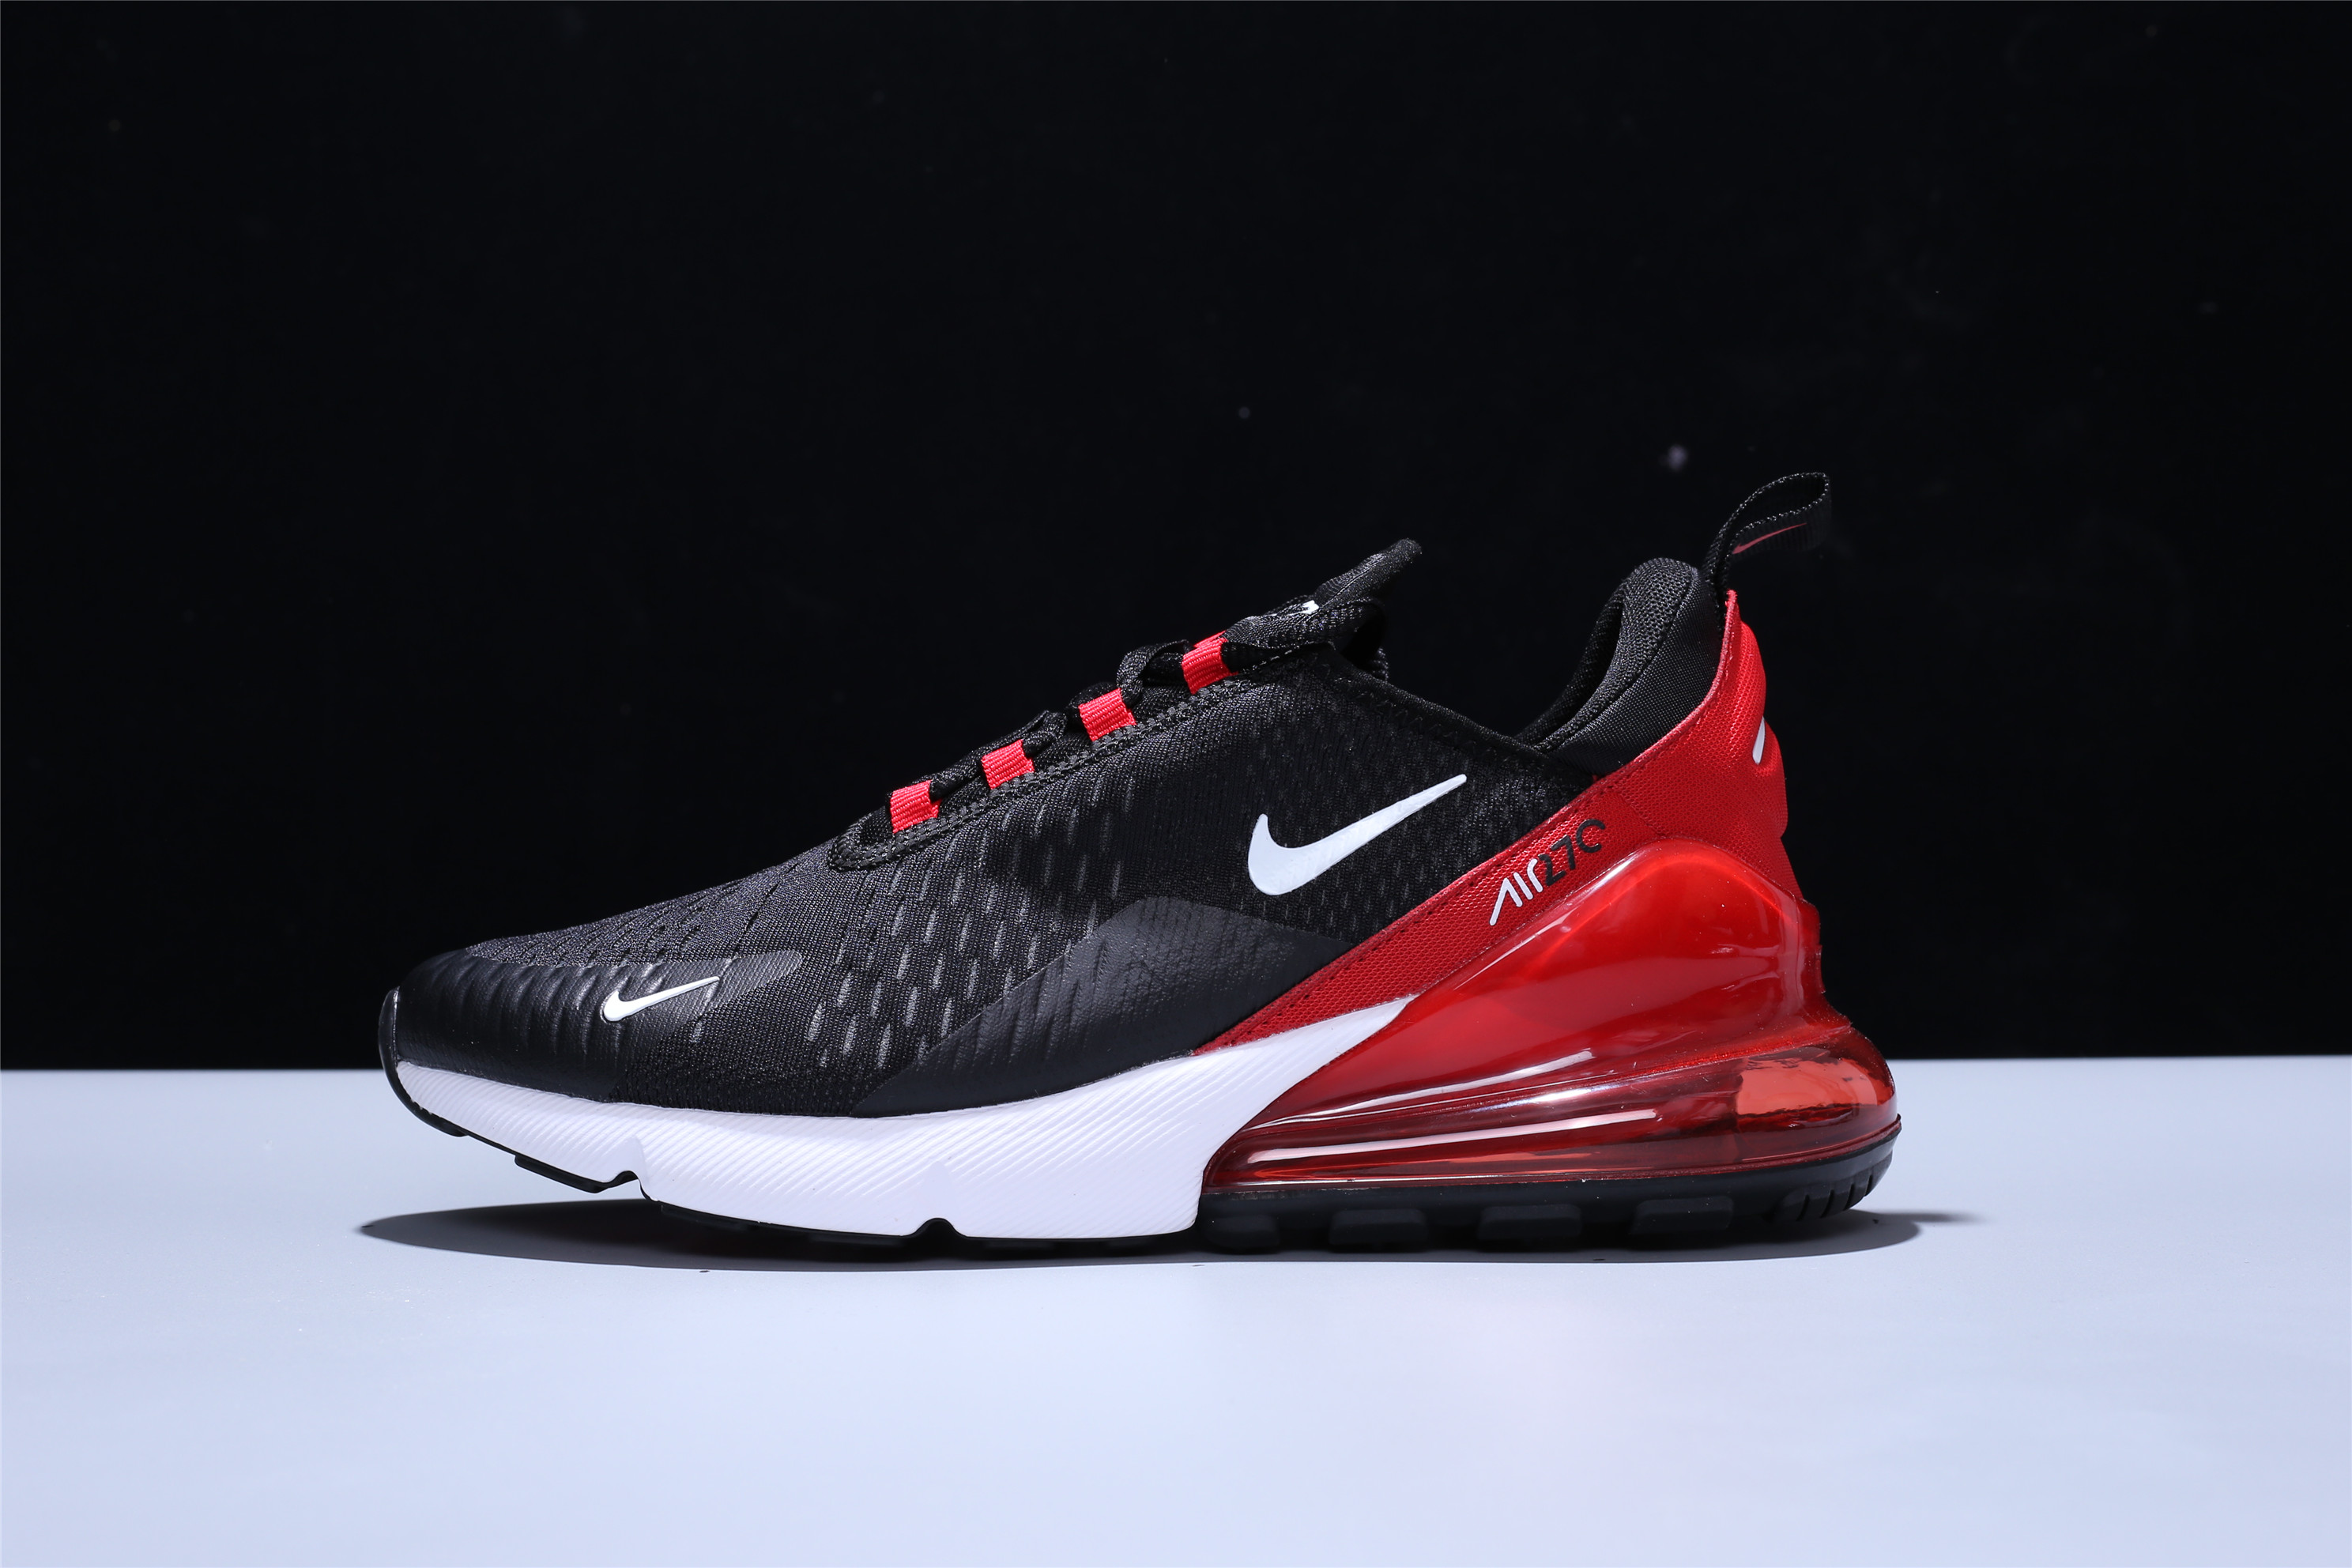 Nike Air Max 270 'Bred' For Sale – The 